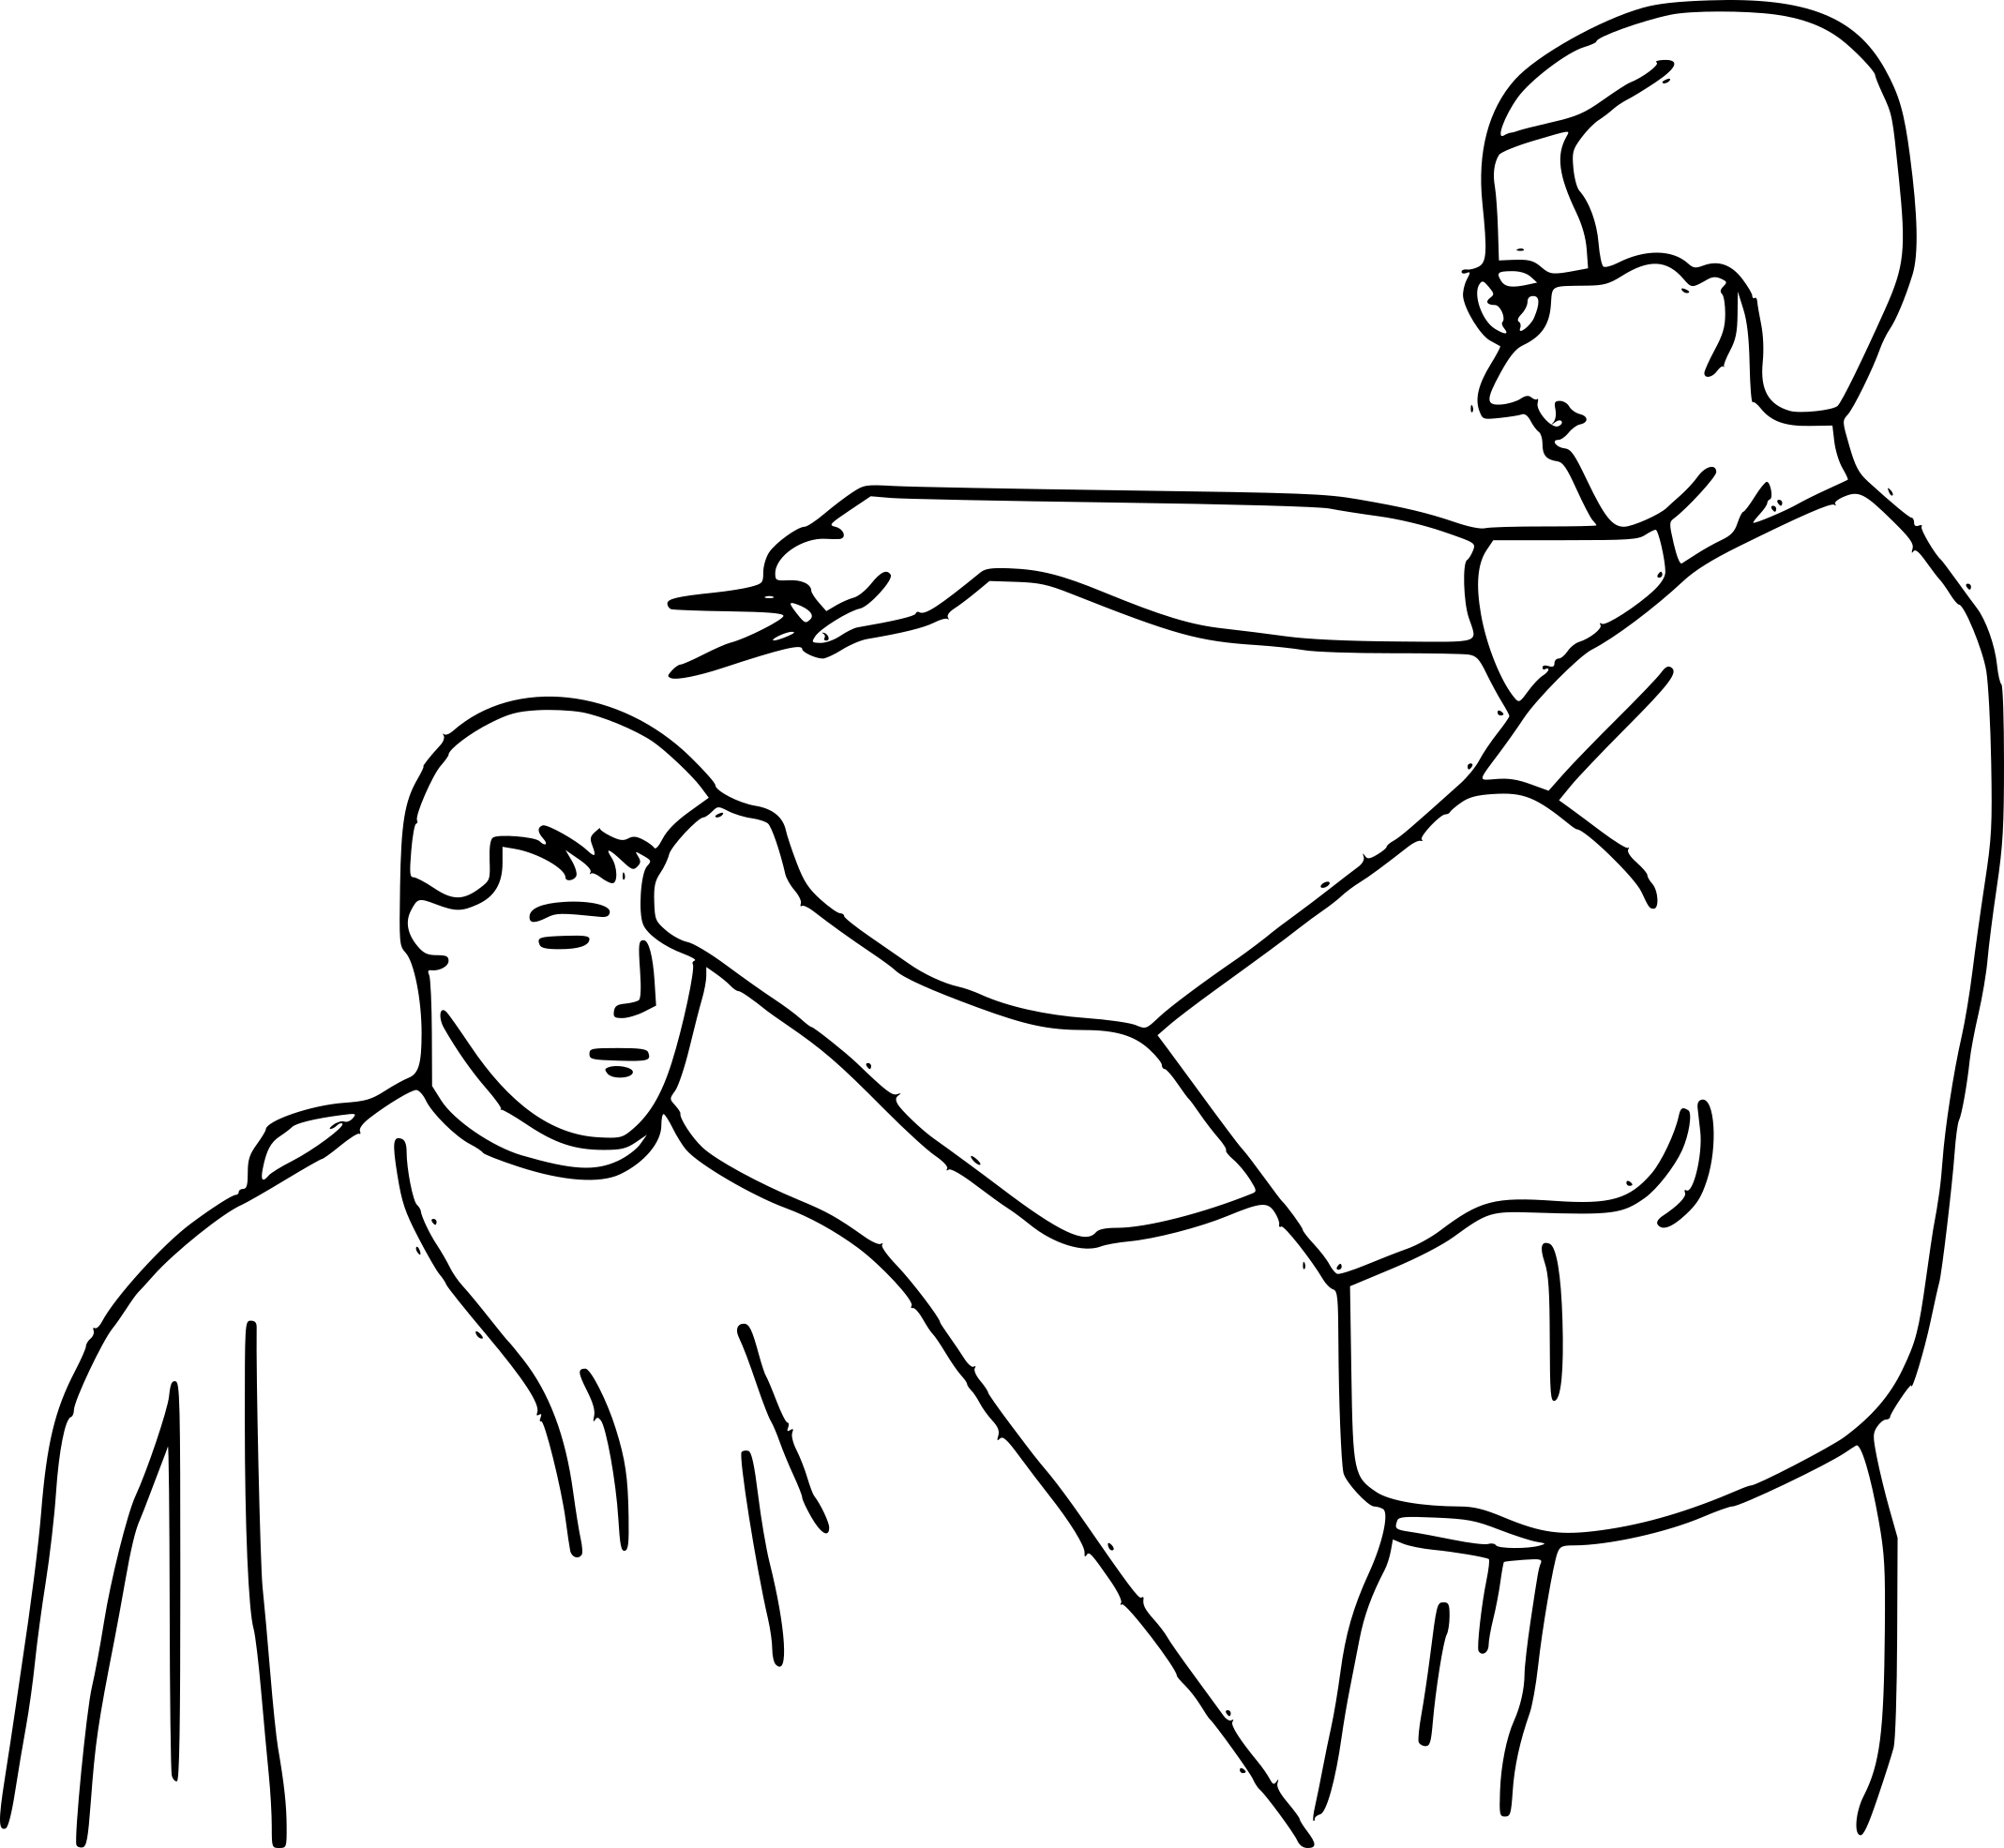 Hairdresser drawing and coloring page